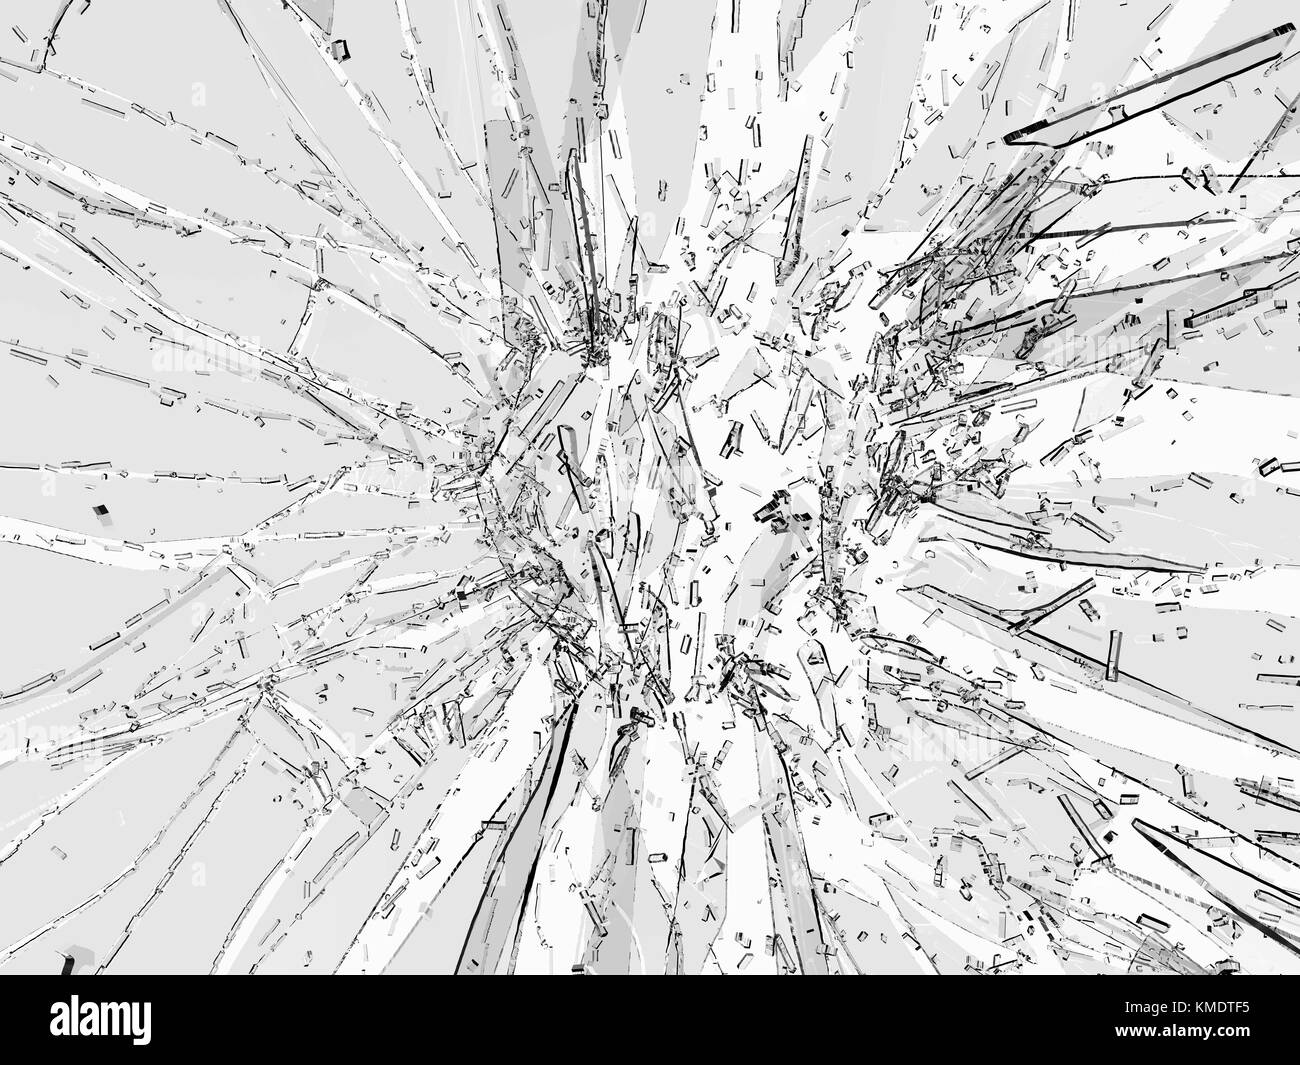 Pieces demolished shattered glass on Black and White Stock Photos & Images  - Alamy